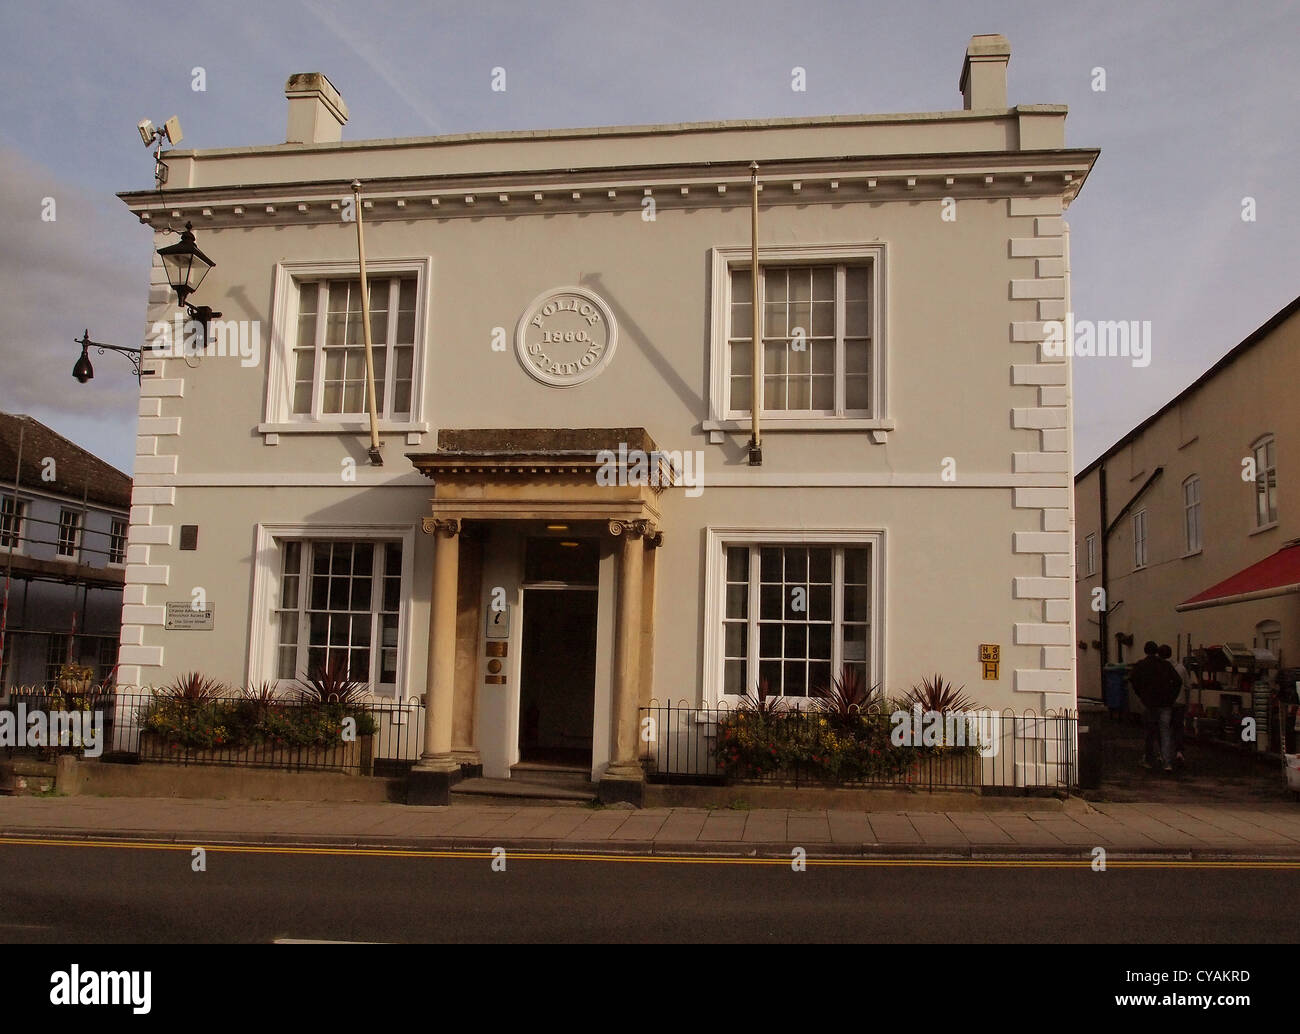 October 2012 - The Old Police station, On the street in Thornbury, South Gloucestershire, England, UK Stock Photo